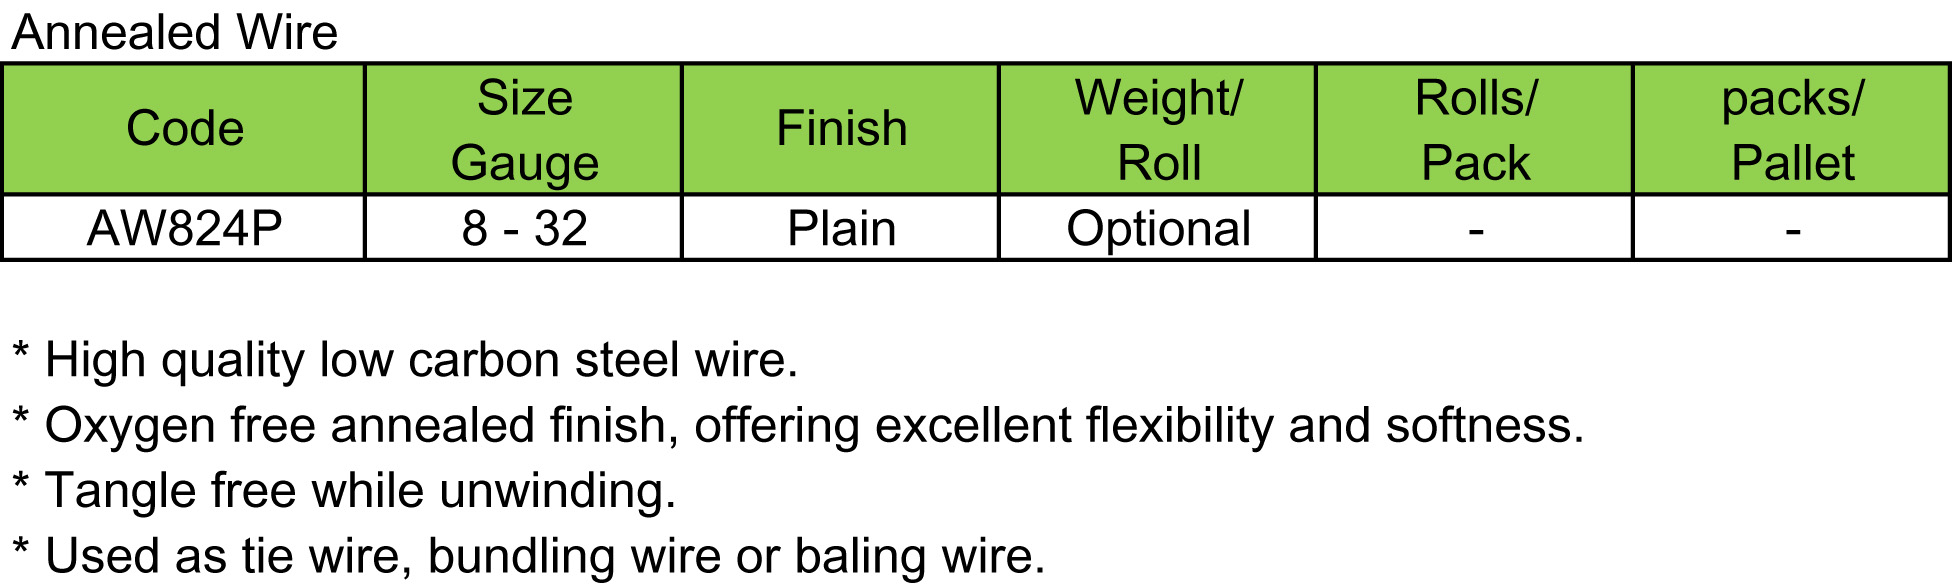 Annealed Wire(图1)